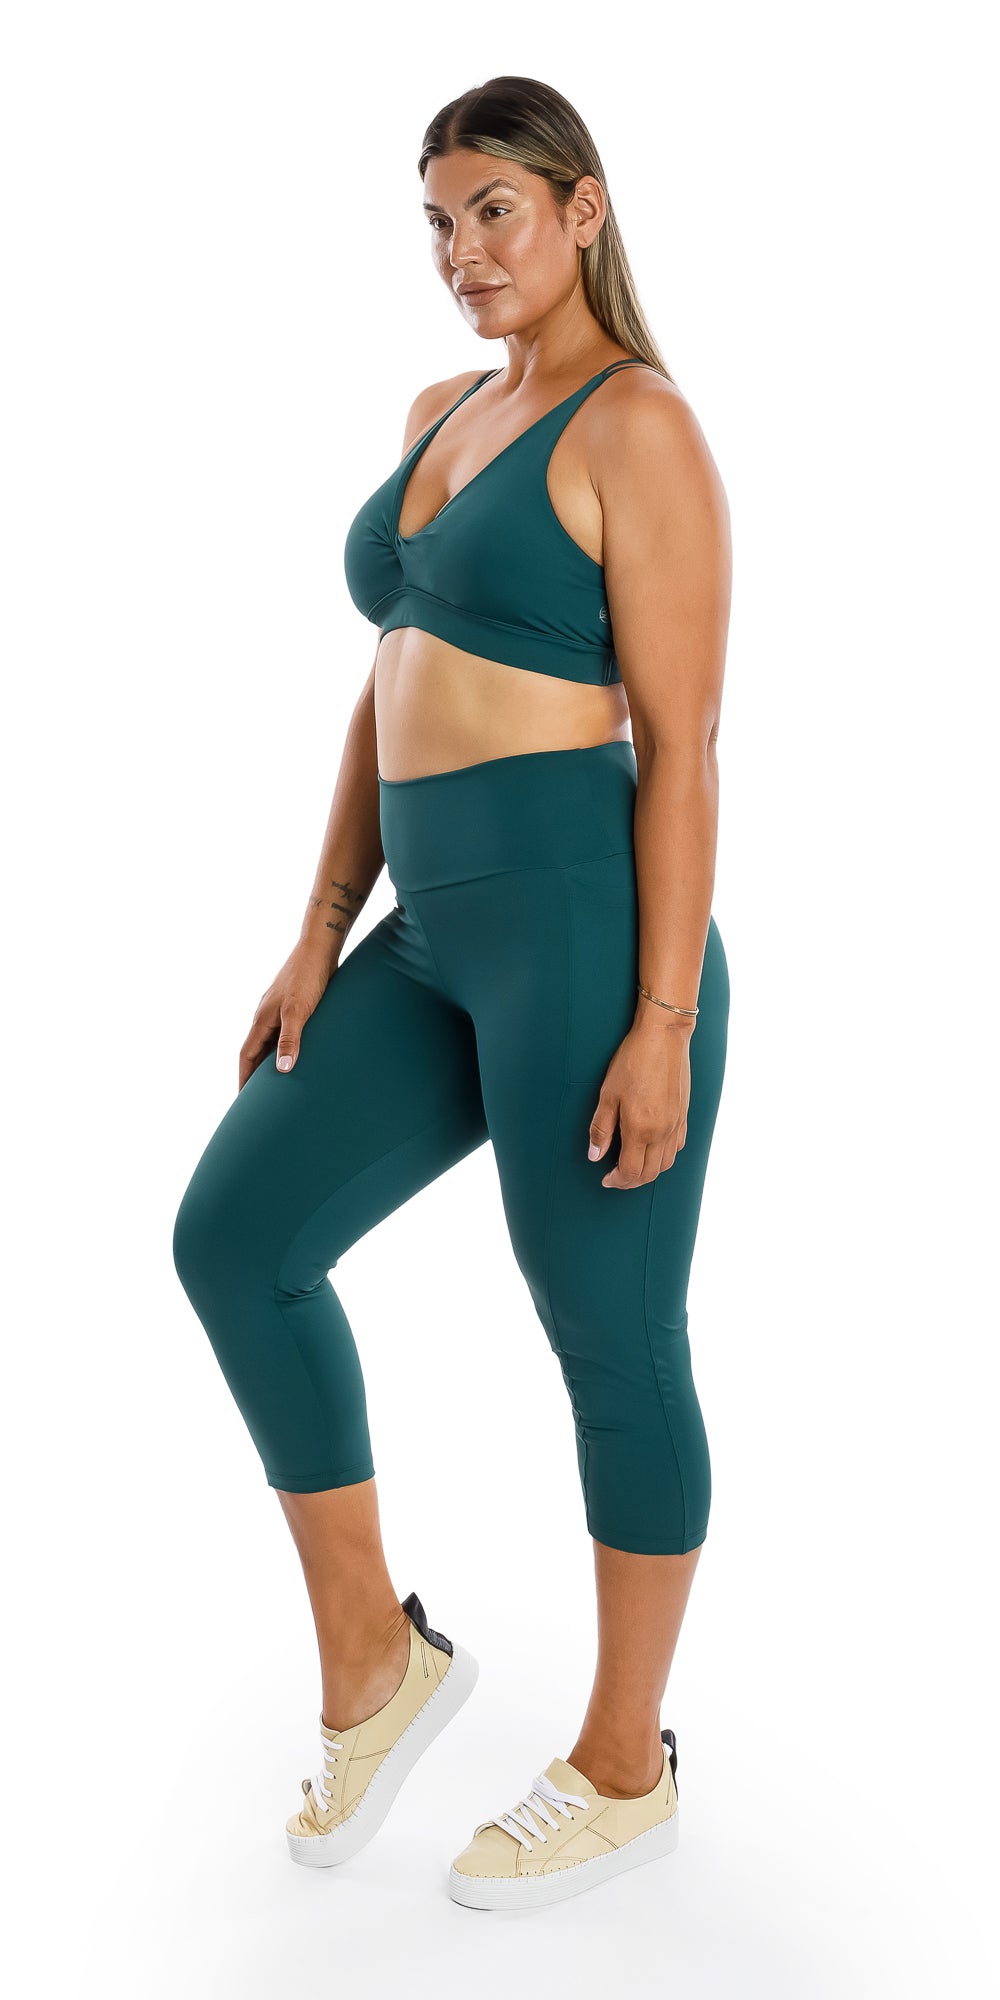 Full body angled side to front view of lady in coloured Teal Body Luxe Diamond Back Bra and matching bottoms putting right foot forward while lifting its heel and putting hand on lap